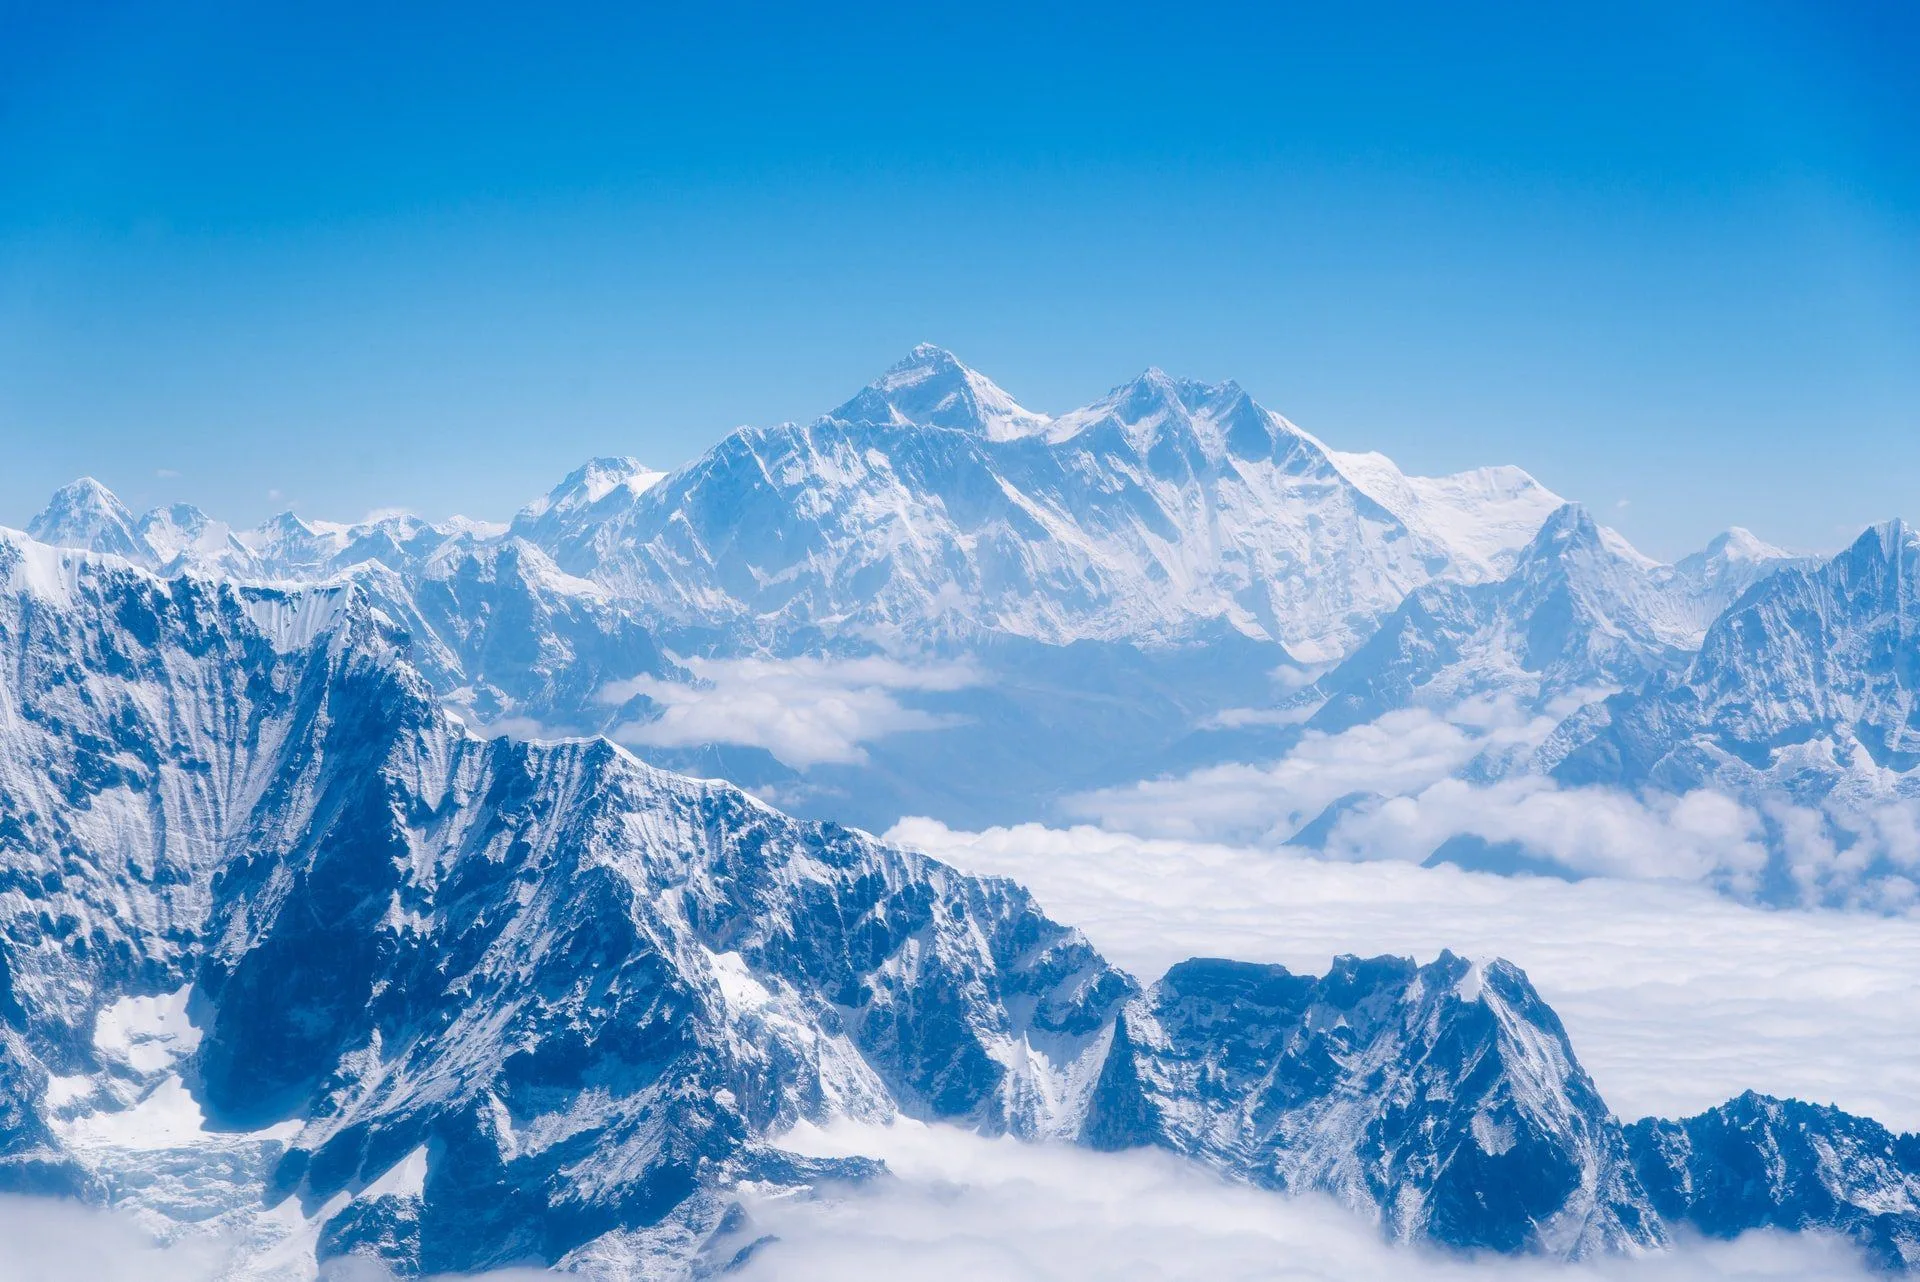 Human-Induced Climate Change Is Melting Mount Everest